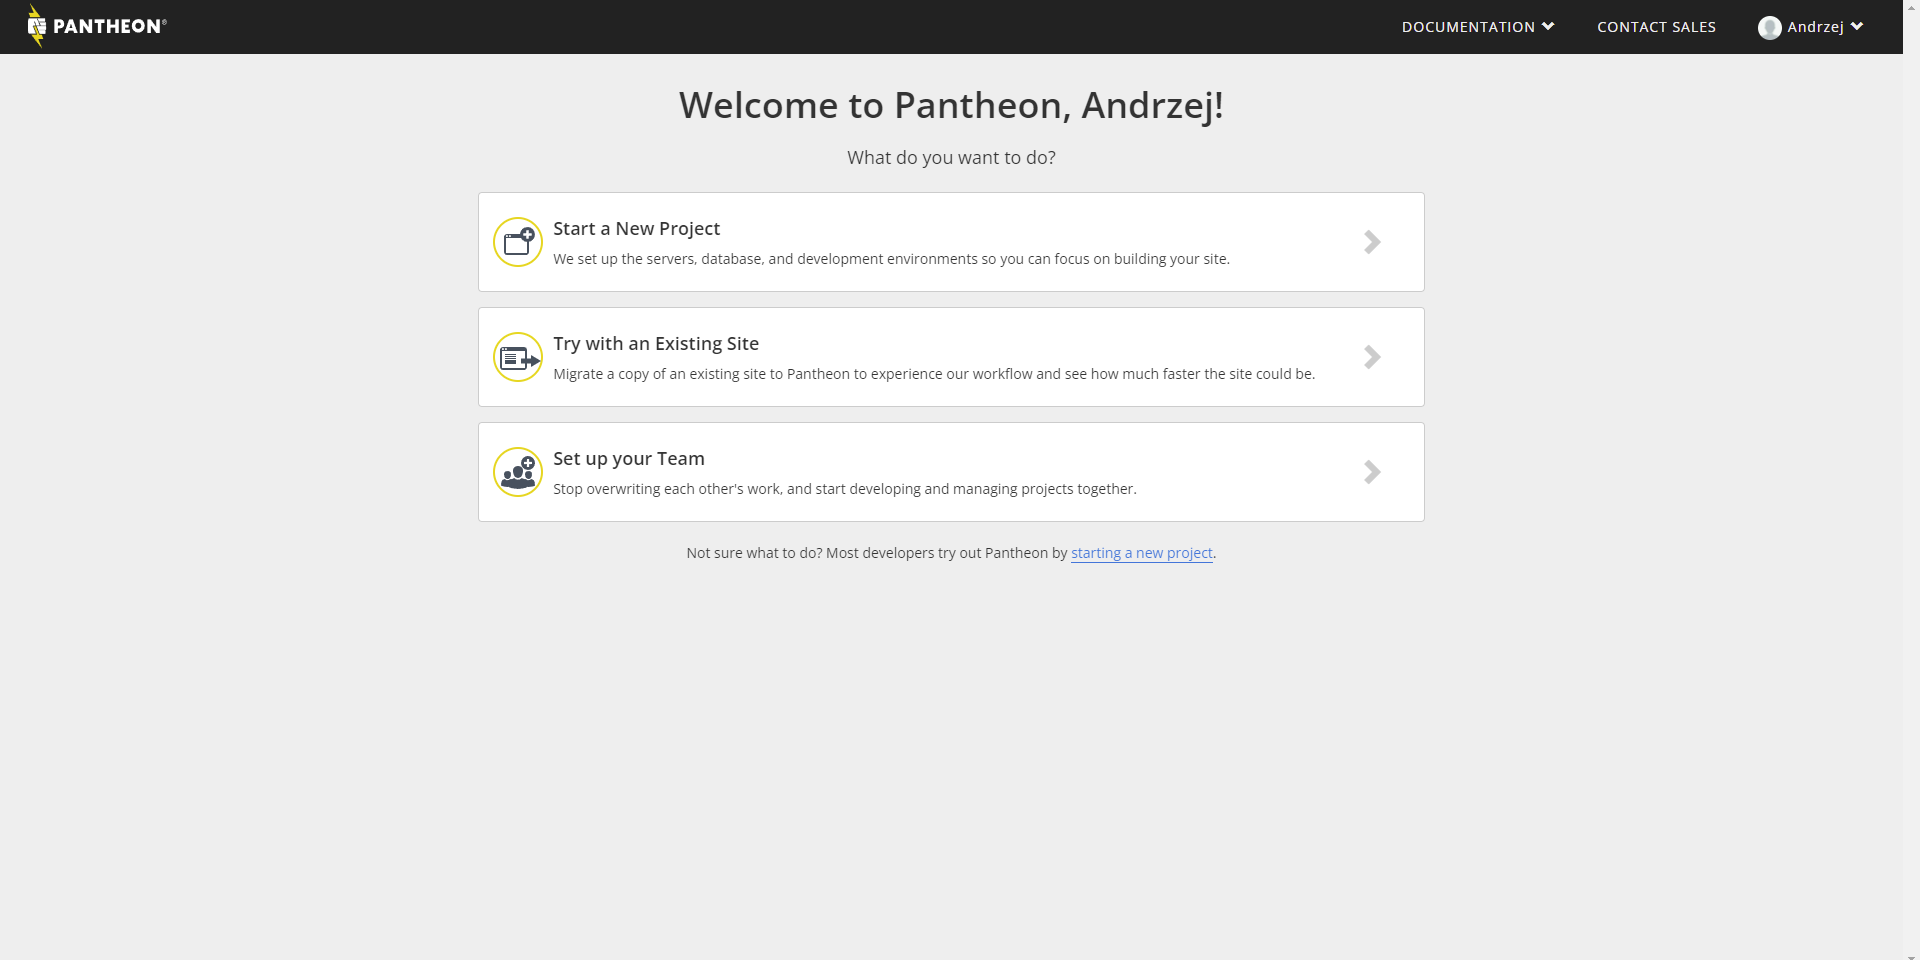 Choosing a new project on the Pantheon platform that offers hosting for Drupal